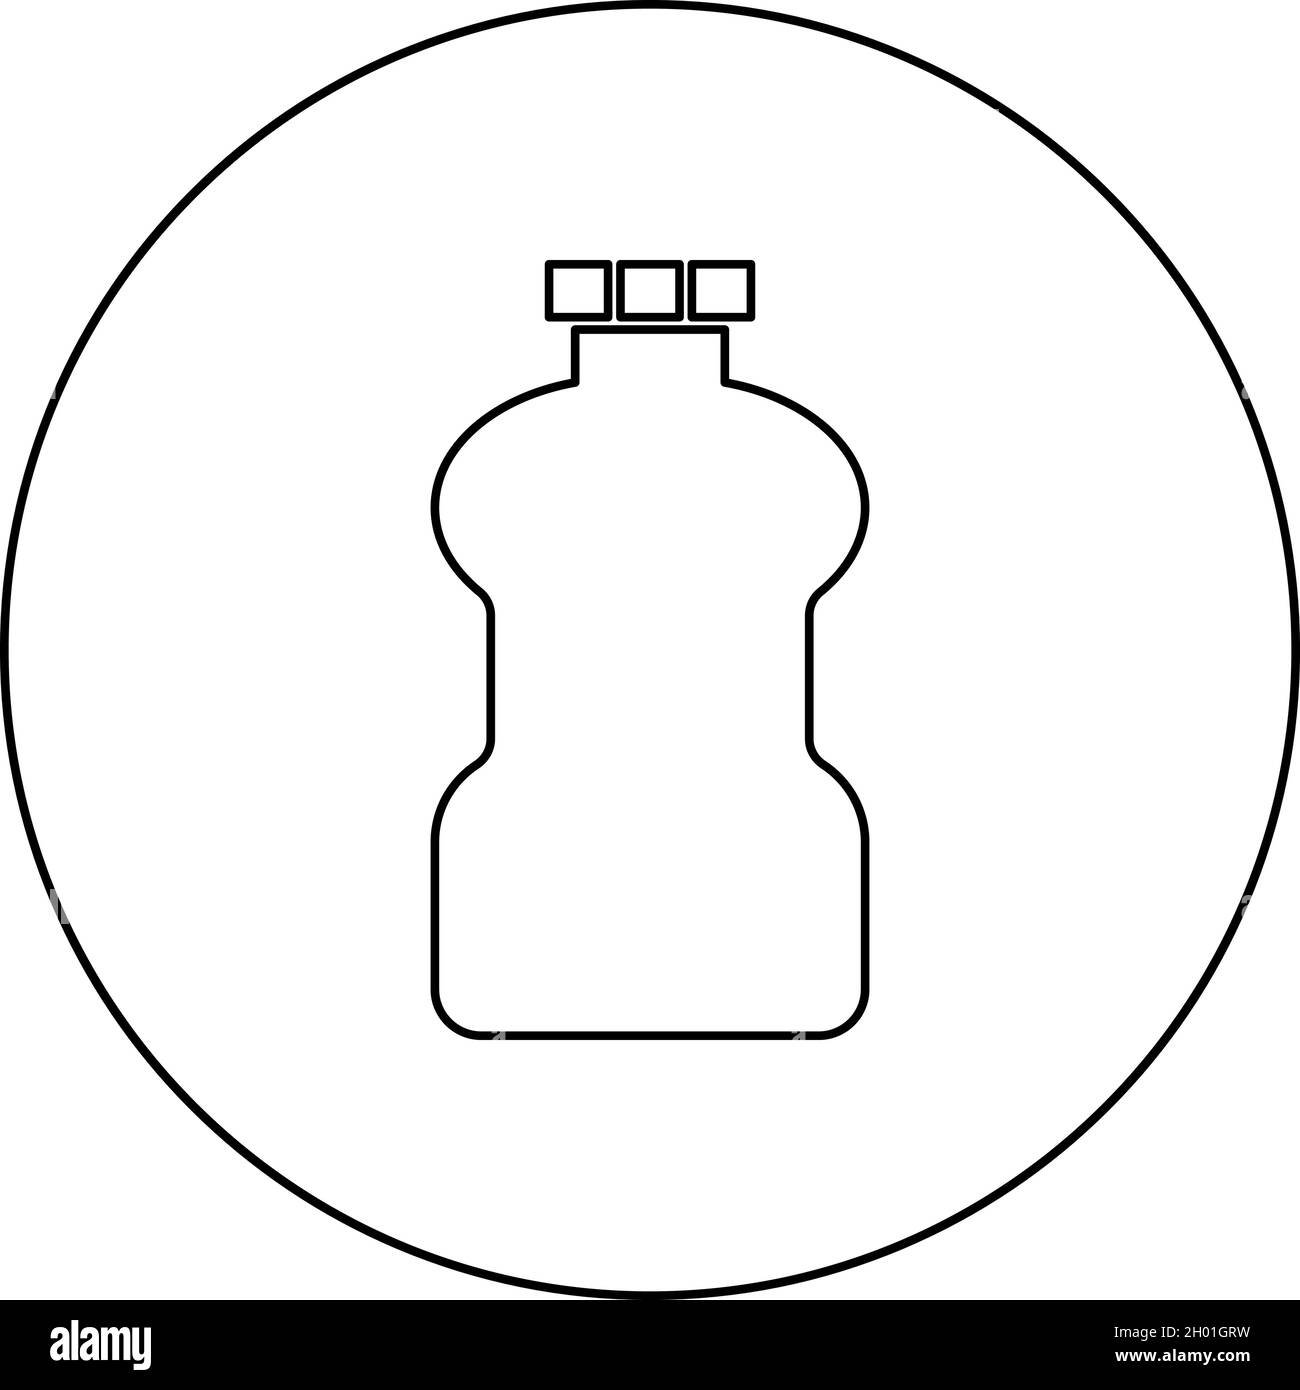 Plastic bottle Cleanser icon in circle round black color vector illustration solid outline style simple image Stock Vector